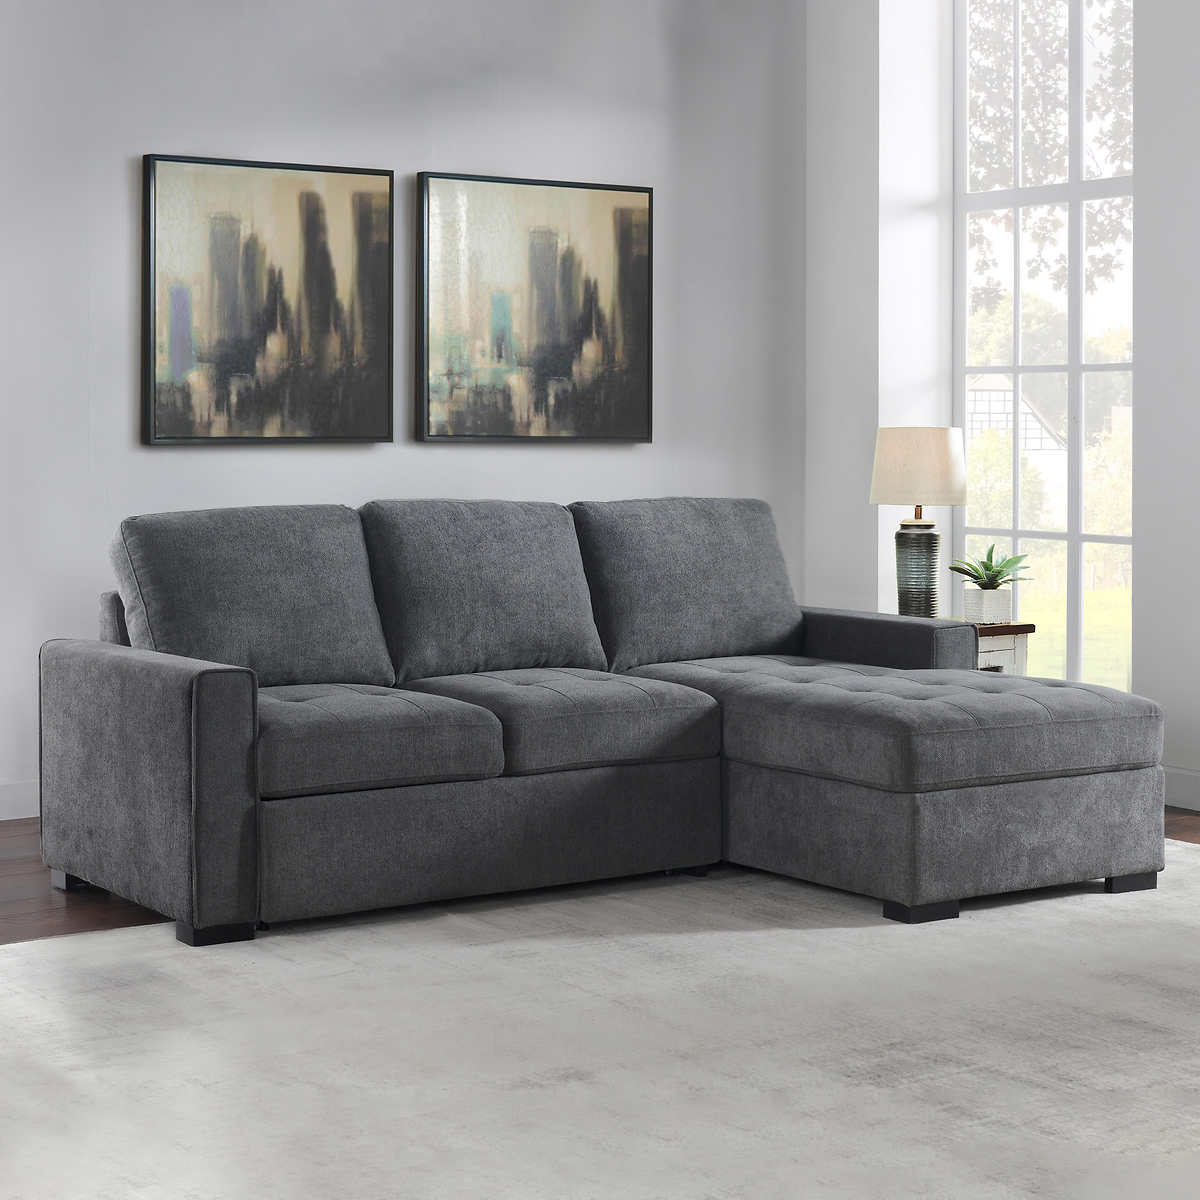 Kendale Sleeper Sofa With Storage, Bandlon Sofa Chaise With Pull Out Sleeper And Storage Unit